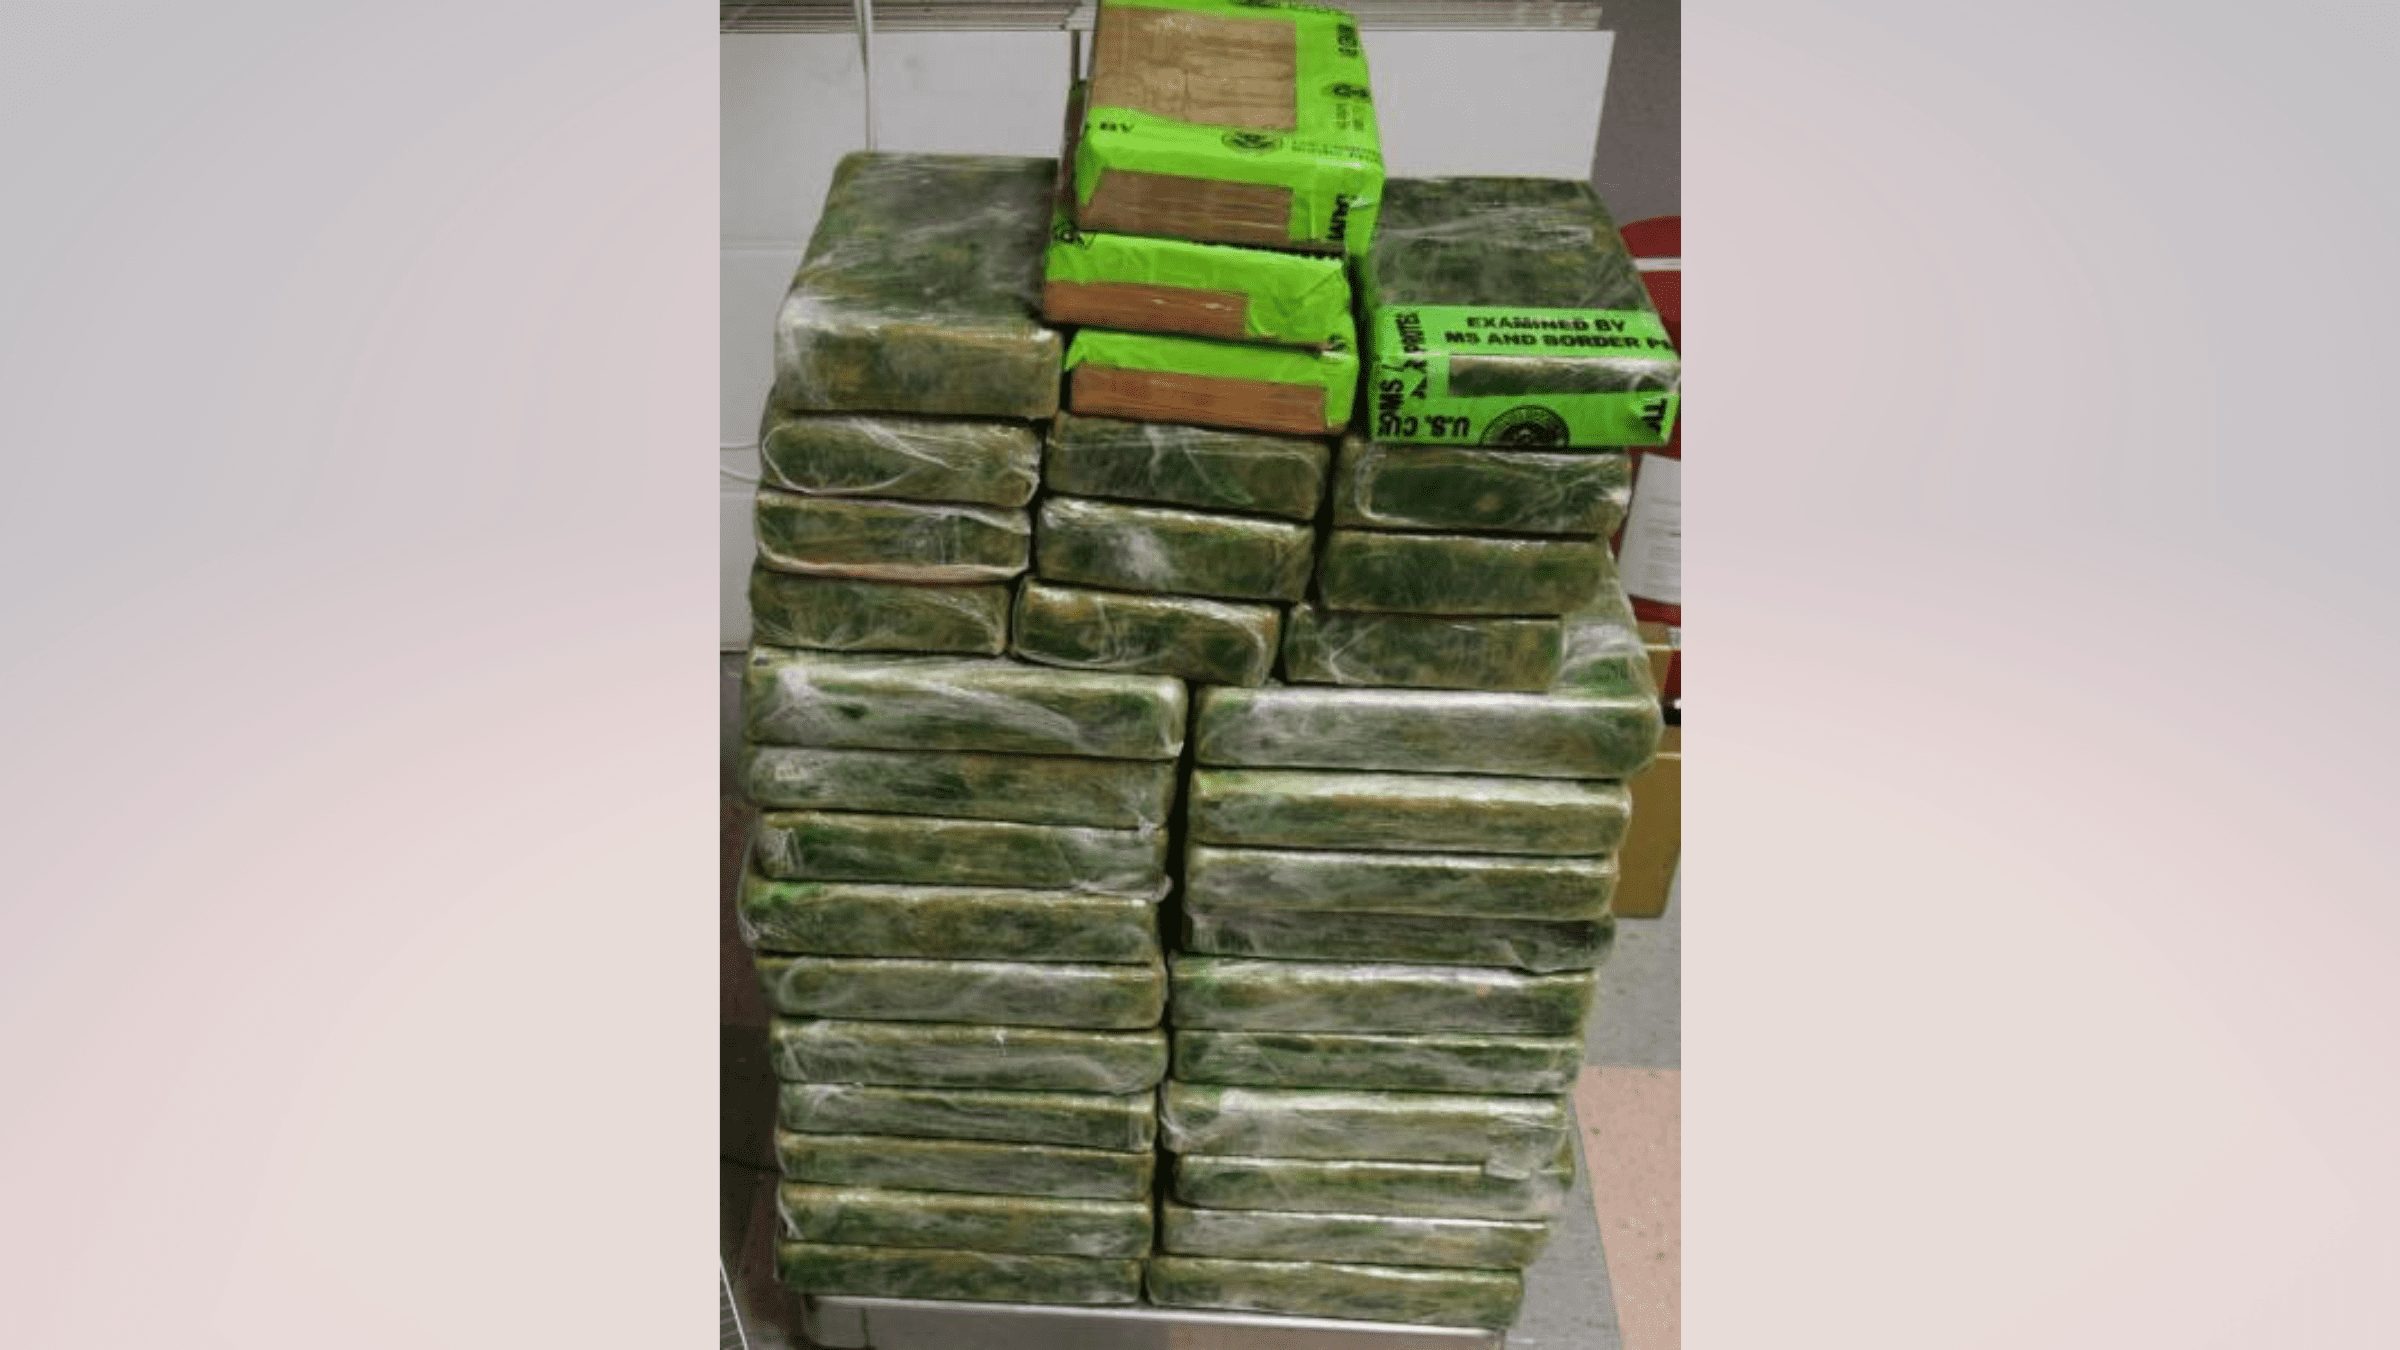 Image of cocaine seized at Los Indios Bridge by CBP | Image by U.S. Customs and Border Protection